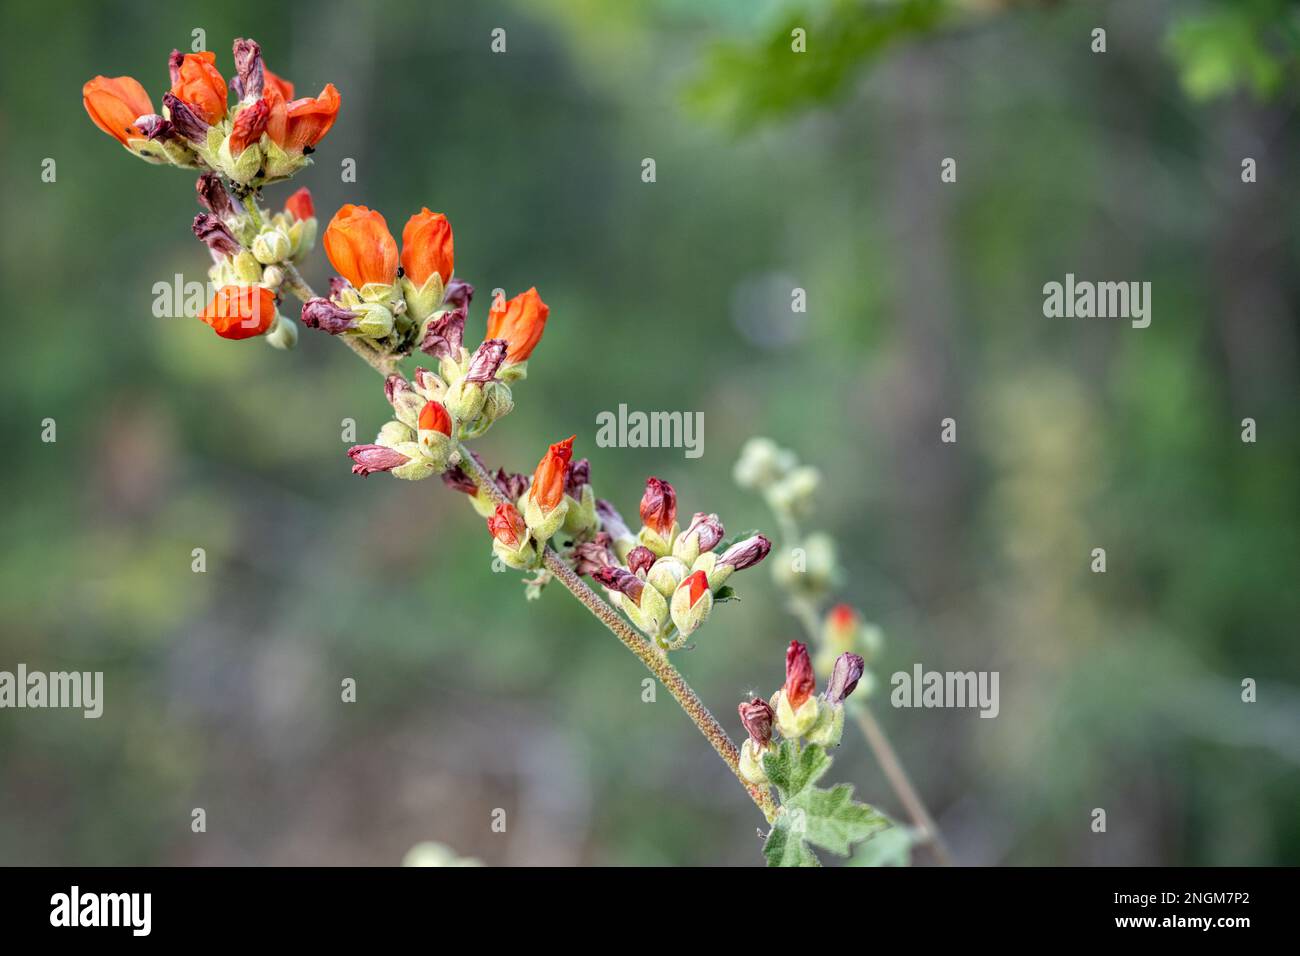 Branch of Globemallow Flowers Stretch Across Image with selective focus Stock Photo